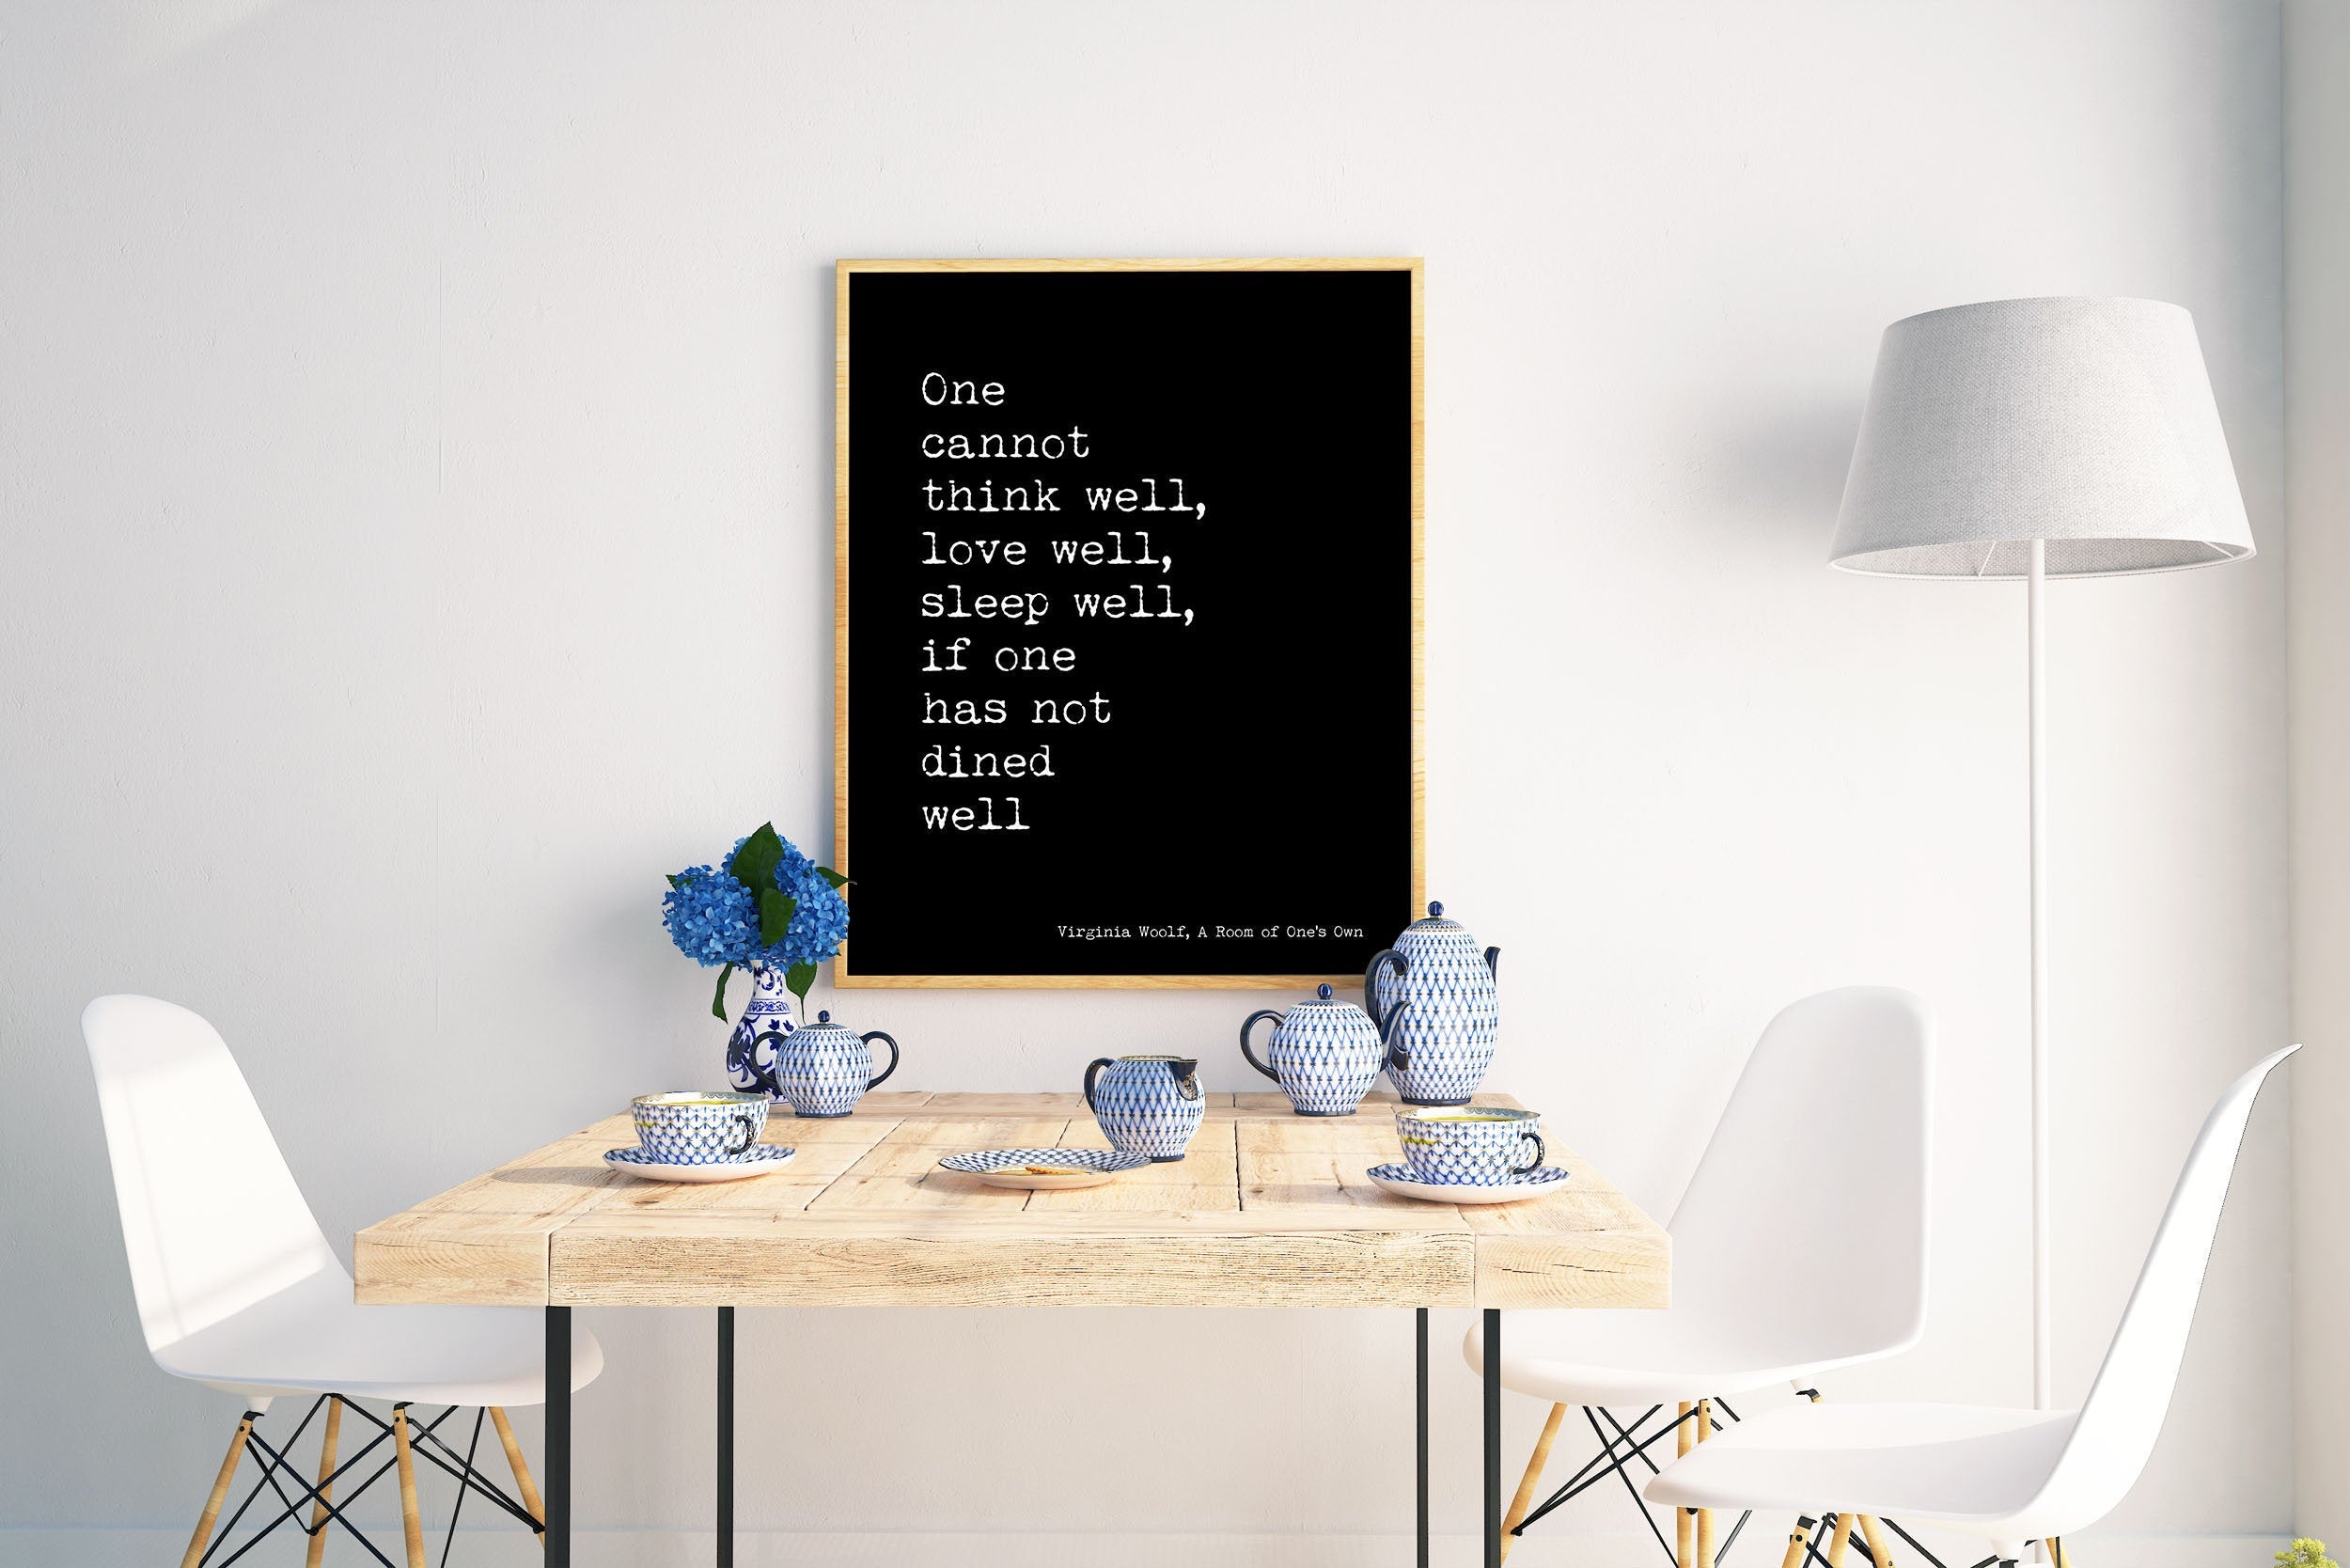 Virginia Woolf Dined Well Quote Print, A Room of One's Own, Kitchen Quote Decor, Inspirational Poster Unframed - BookQuoteDecor